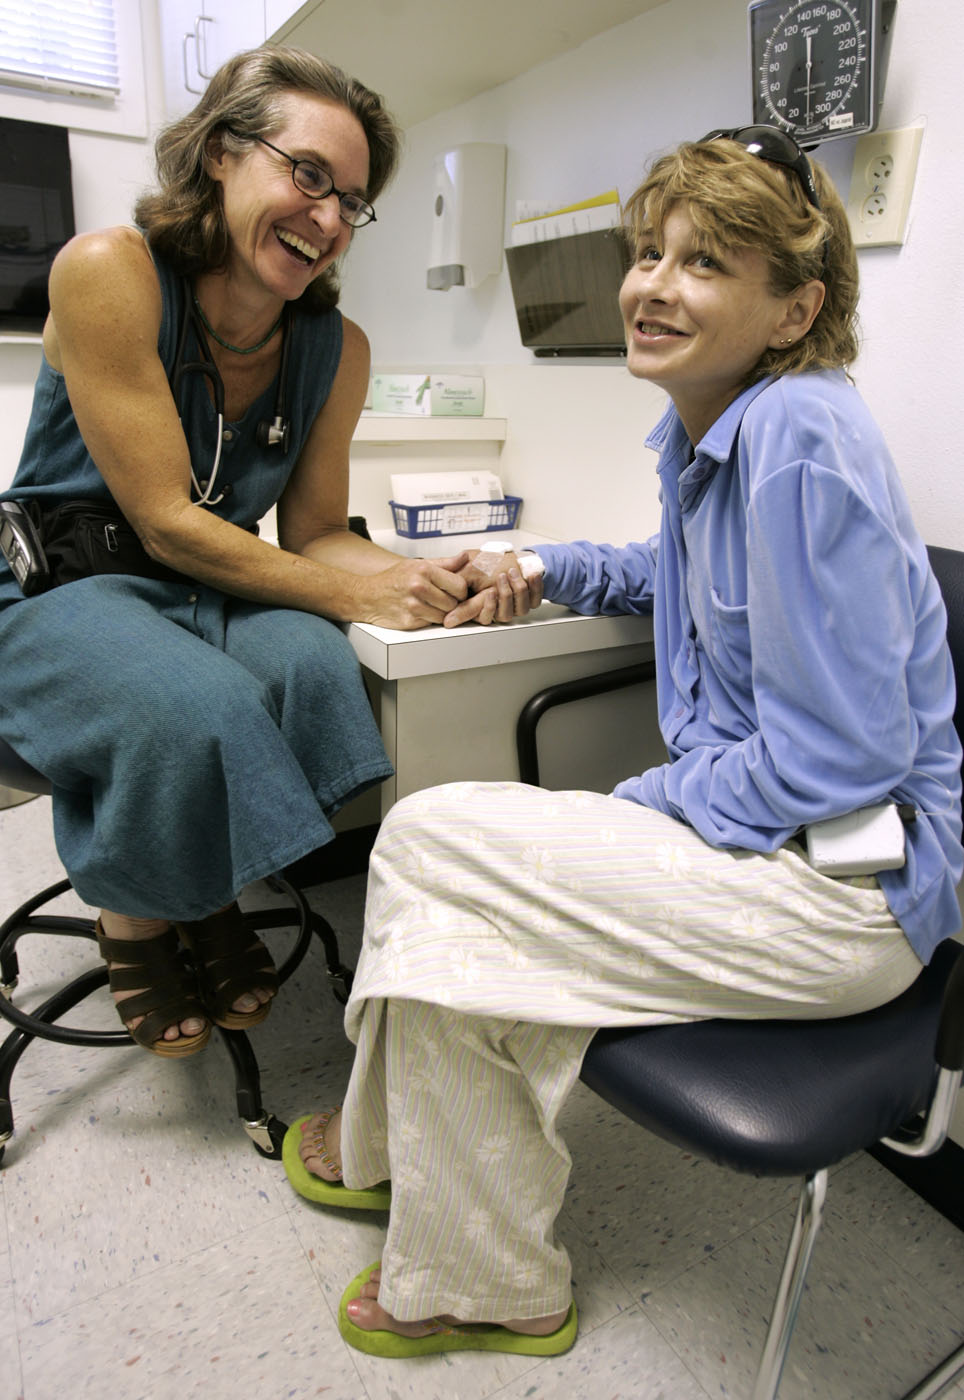 Providing care to patient in clinic for uninsured, Austin, Texas, 2006.